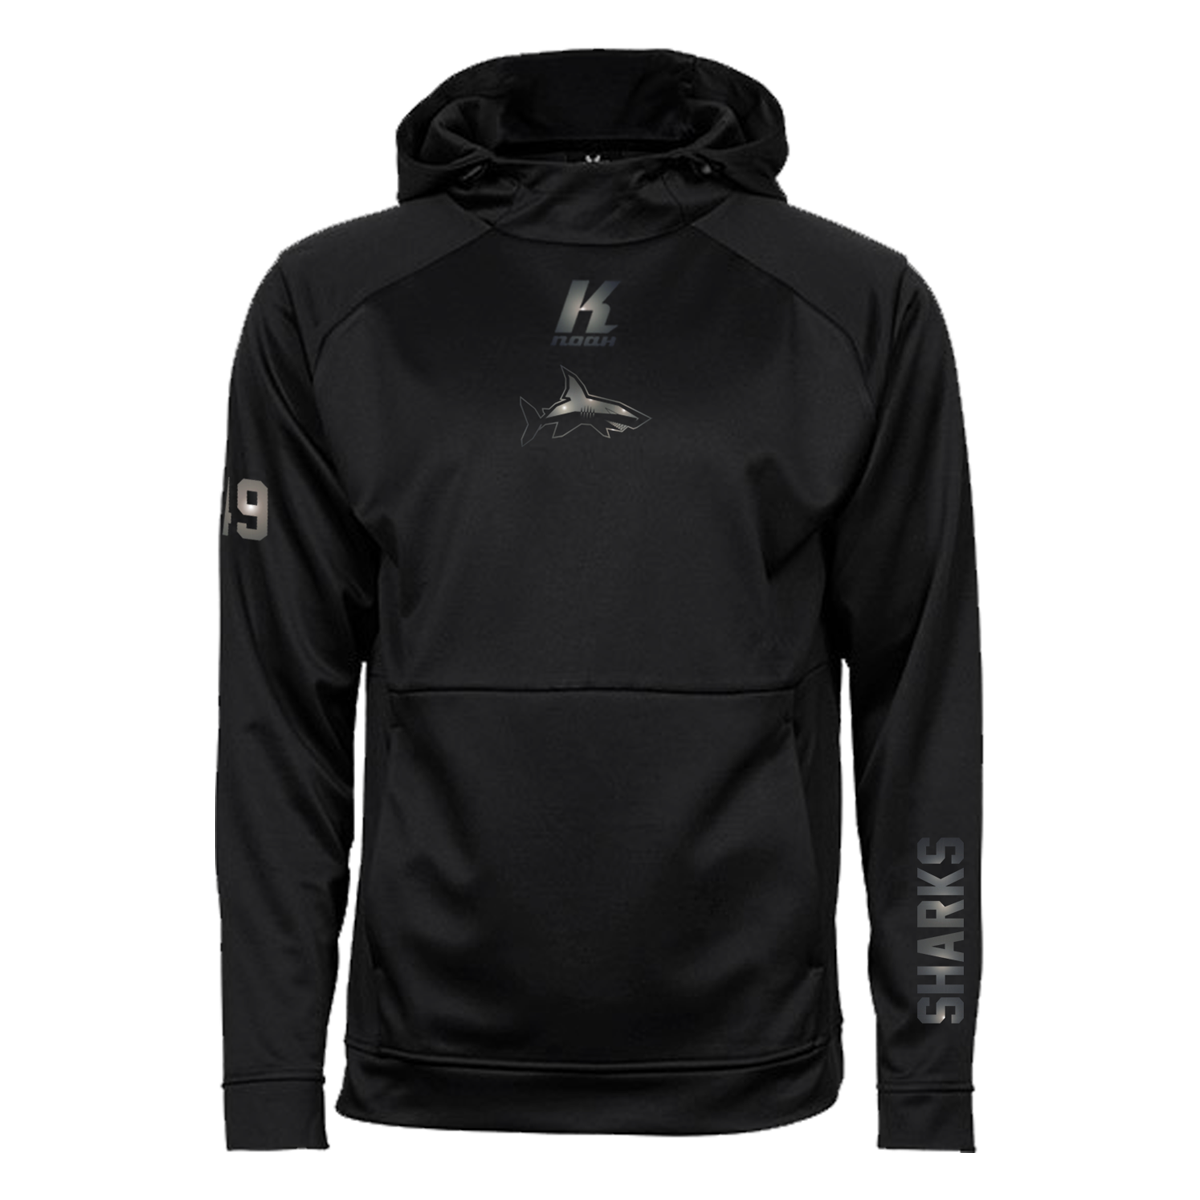 Sharks "Blackline" Performance Hoodie JH006 with Playernumber or Initials